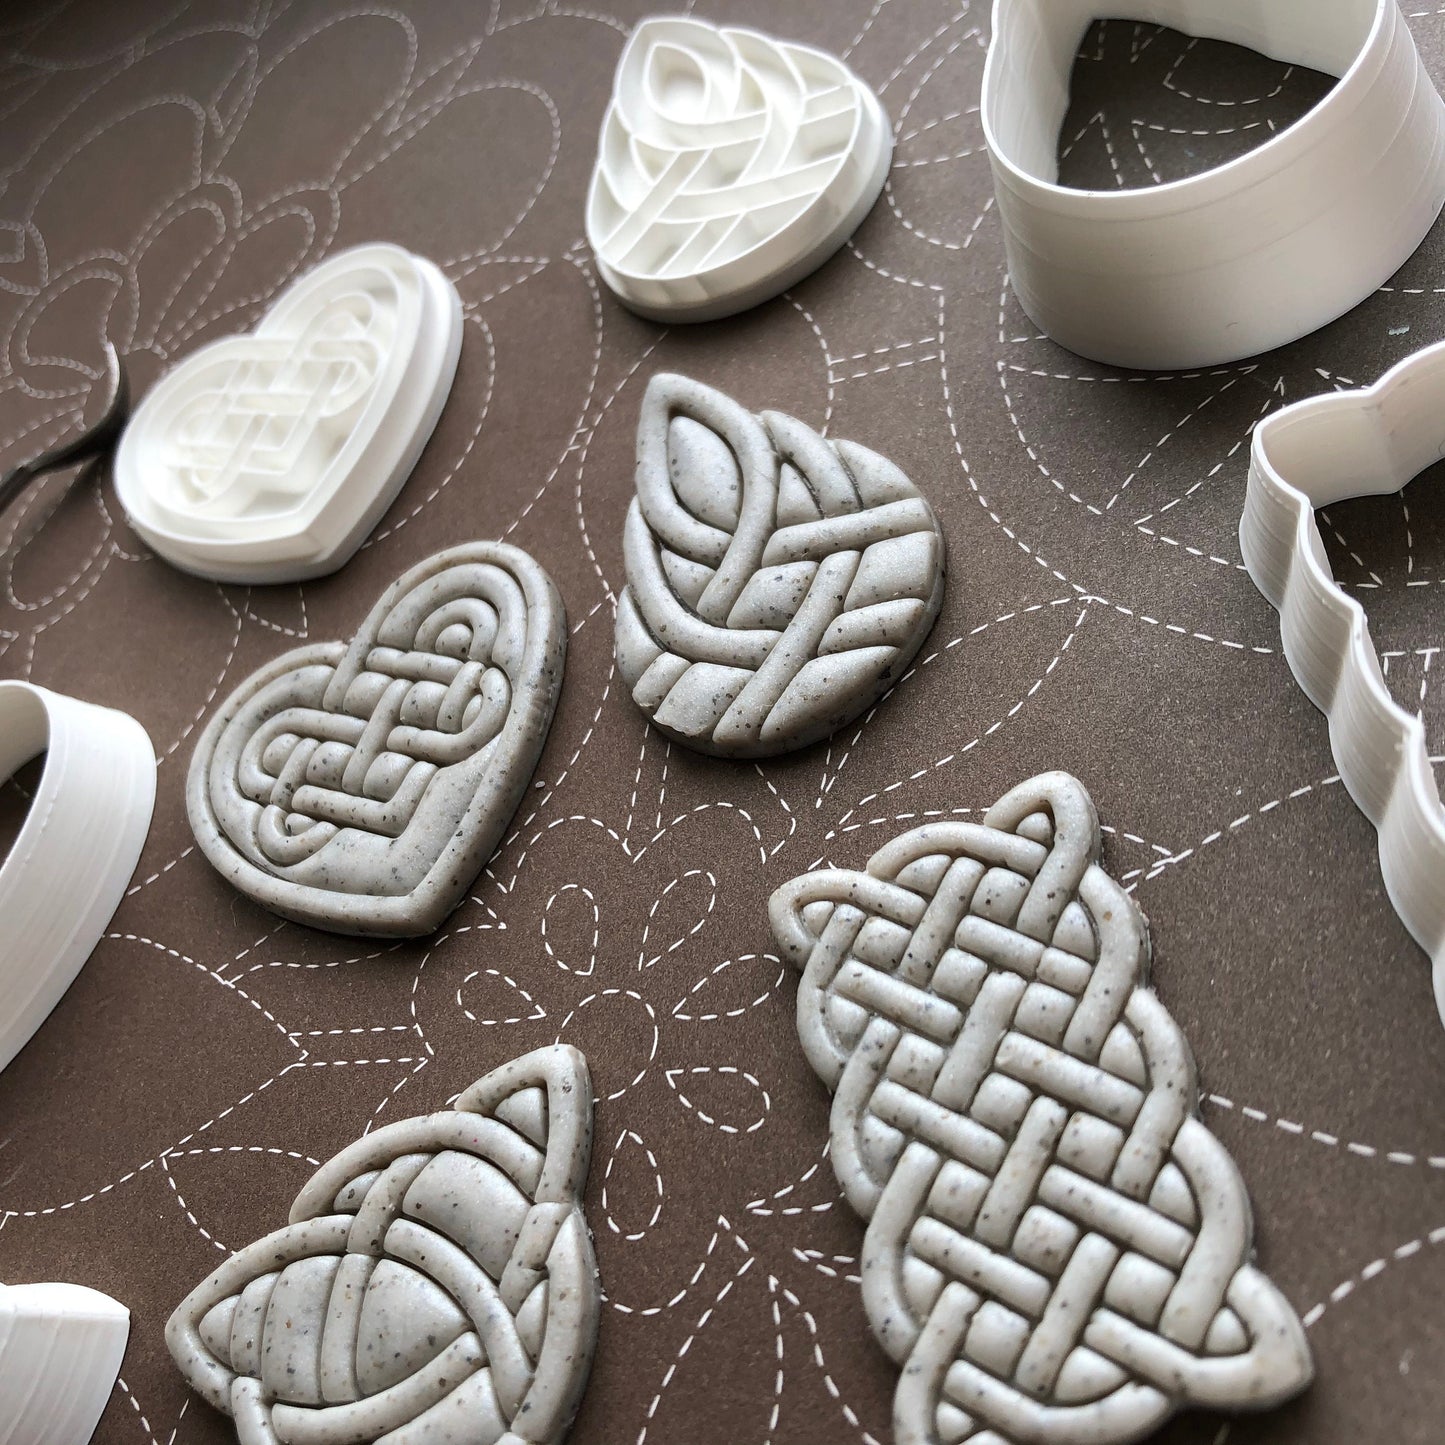 Celtic stamp set with matching cutters - made for use with polymer clay